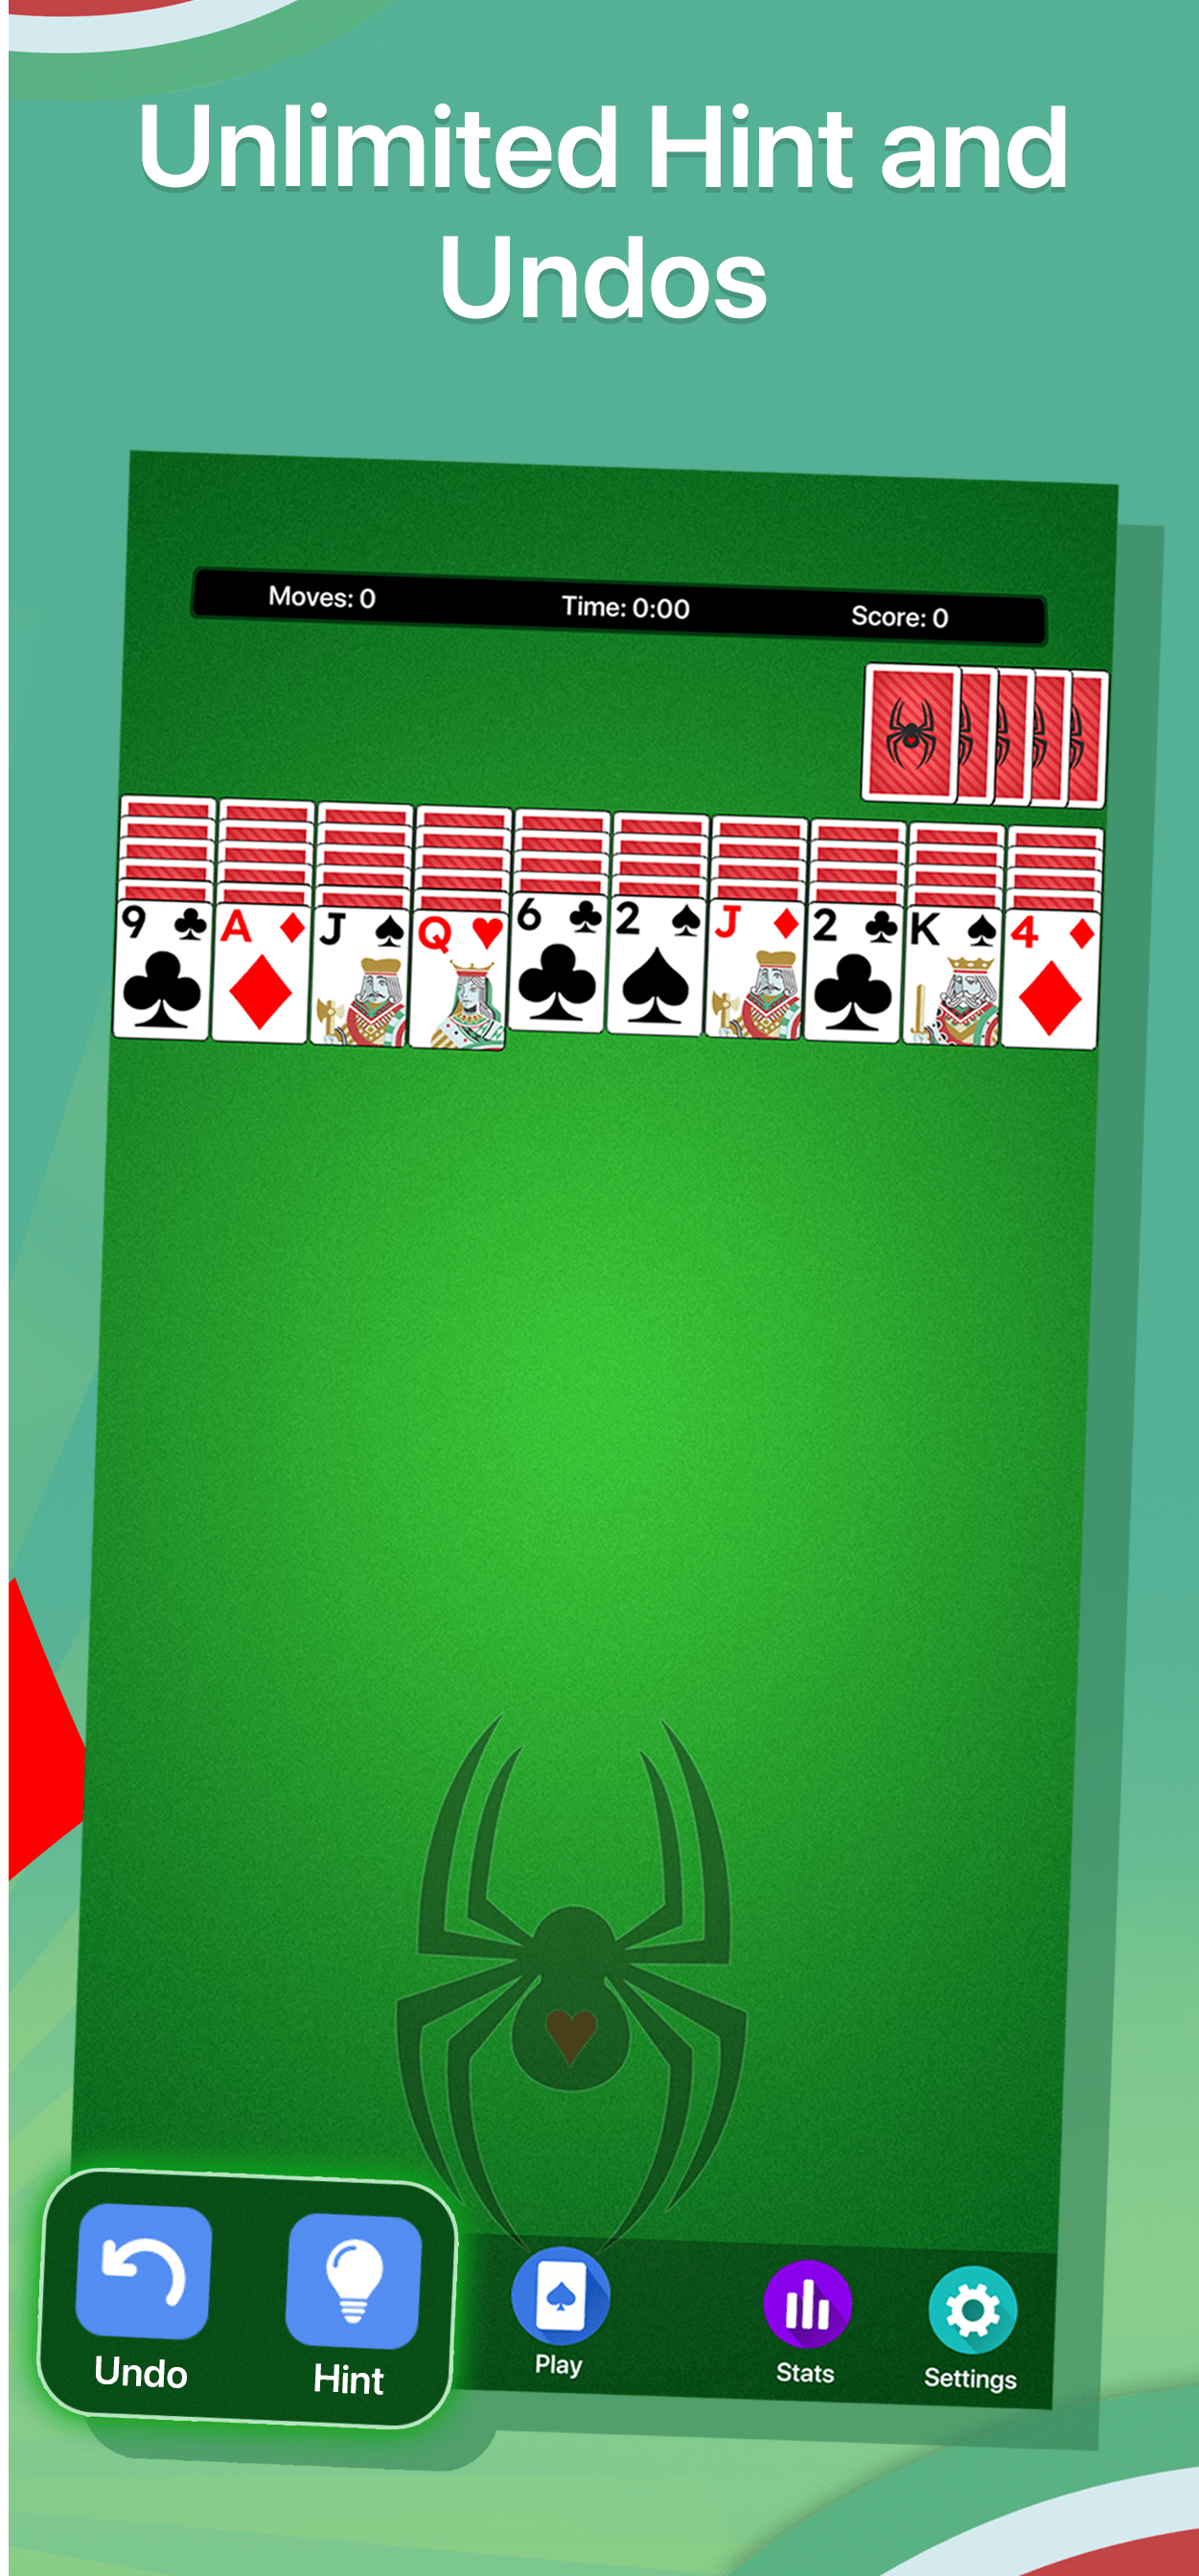 Spider Solitaire Game Screenshot